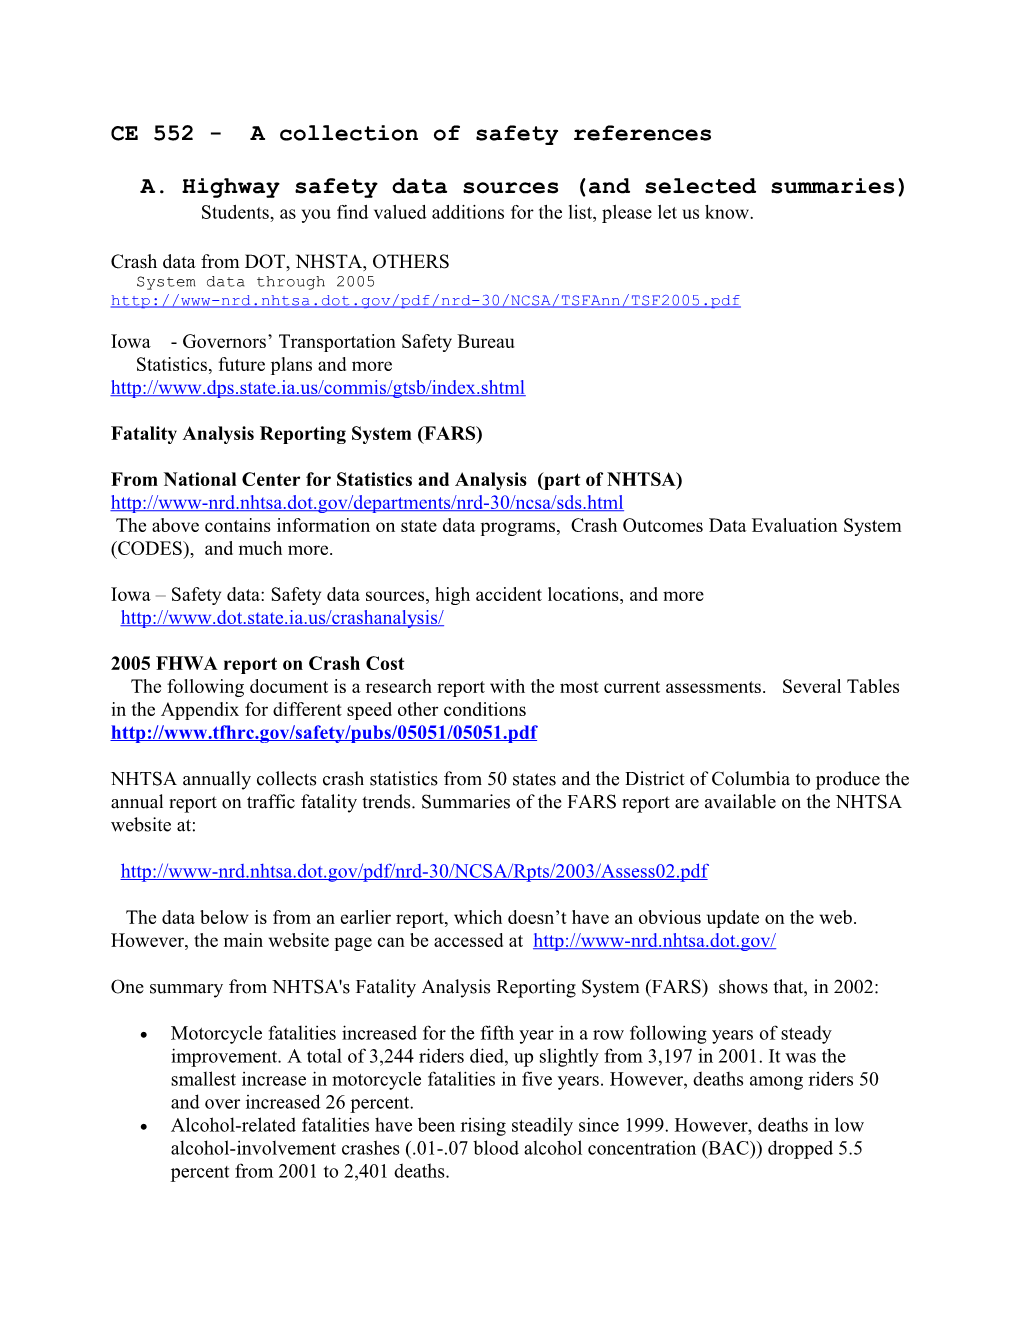 Maximizing Safety and Efficient Operations for the Highway User